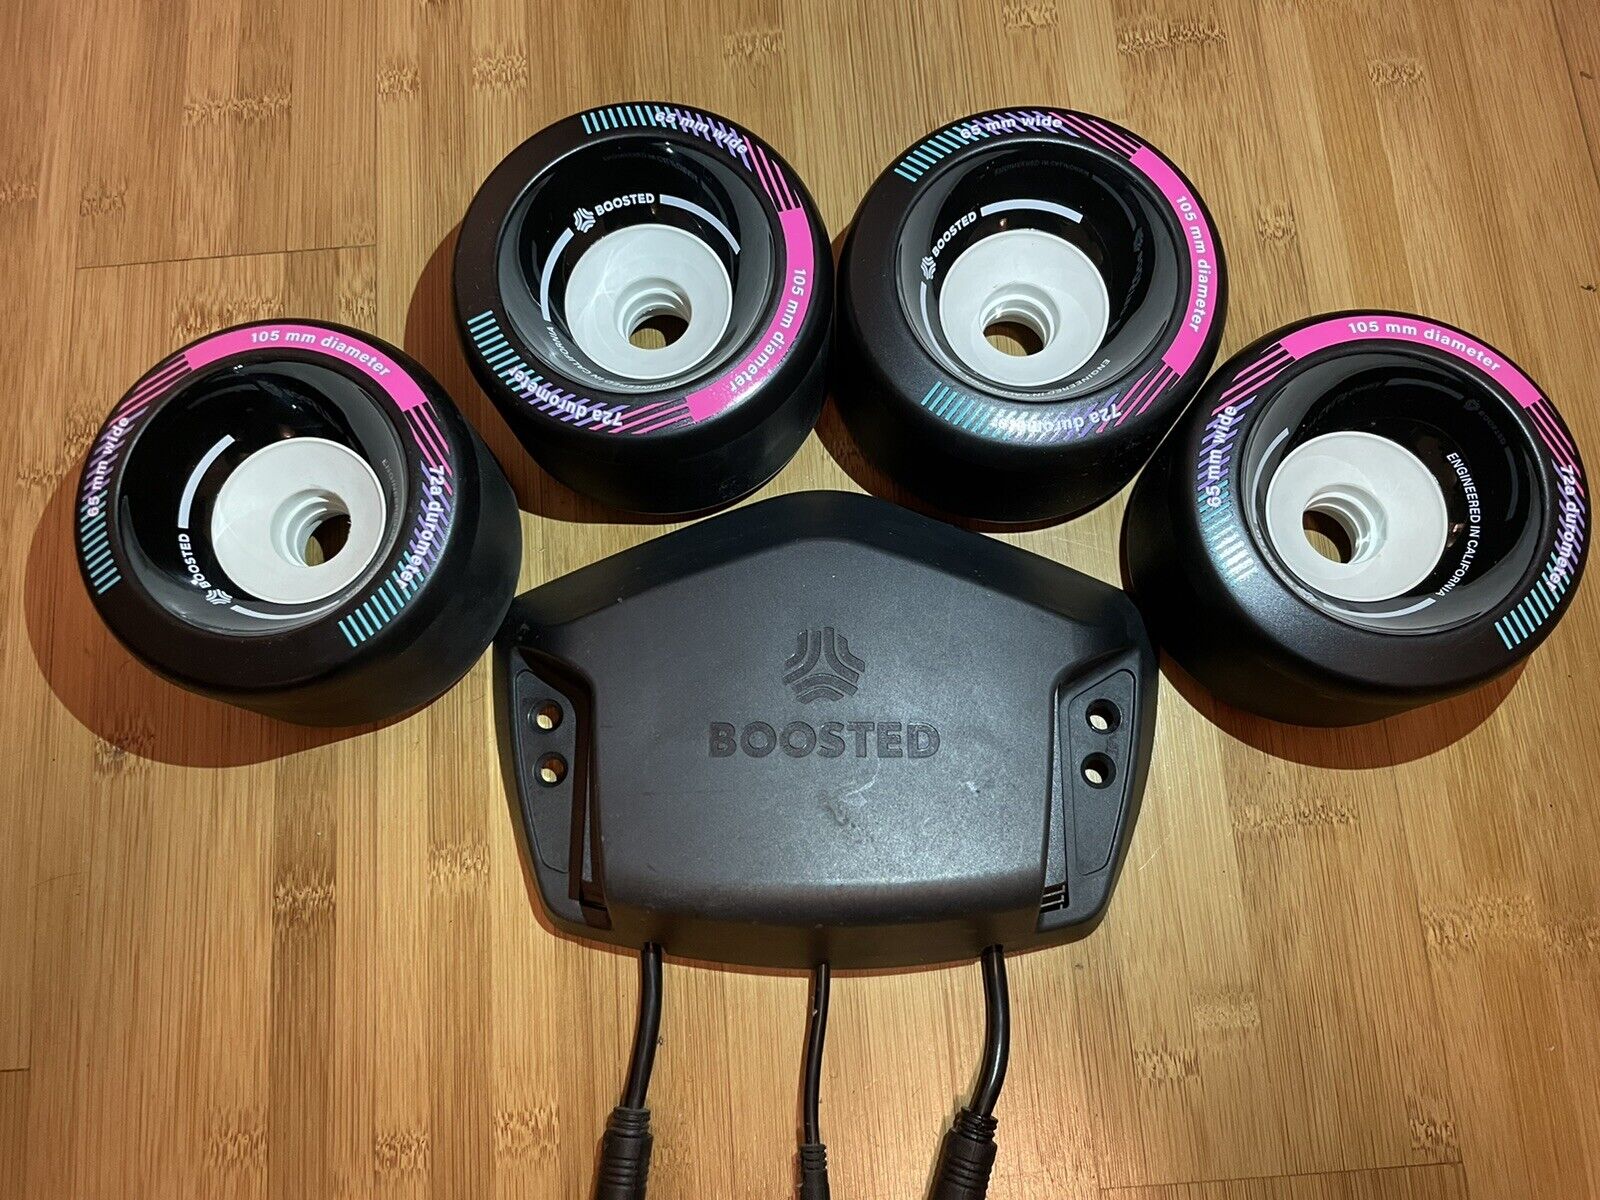 New Esc & 105’s Stealth Boosted Board Speed N Comfort Upgrade Wheels 24mph!!!!